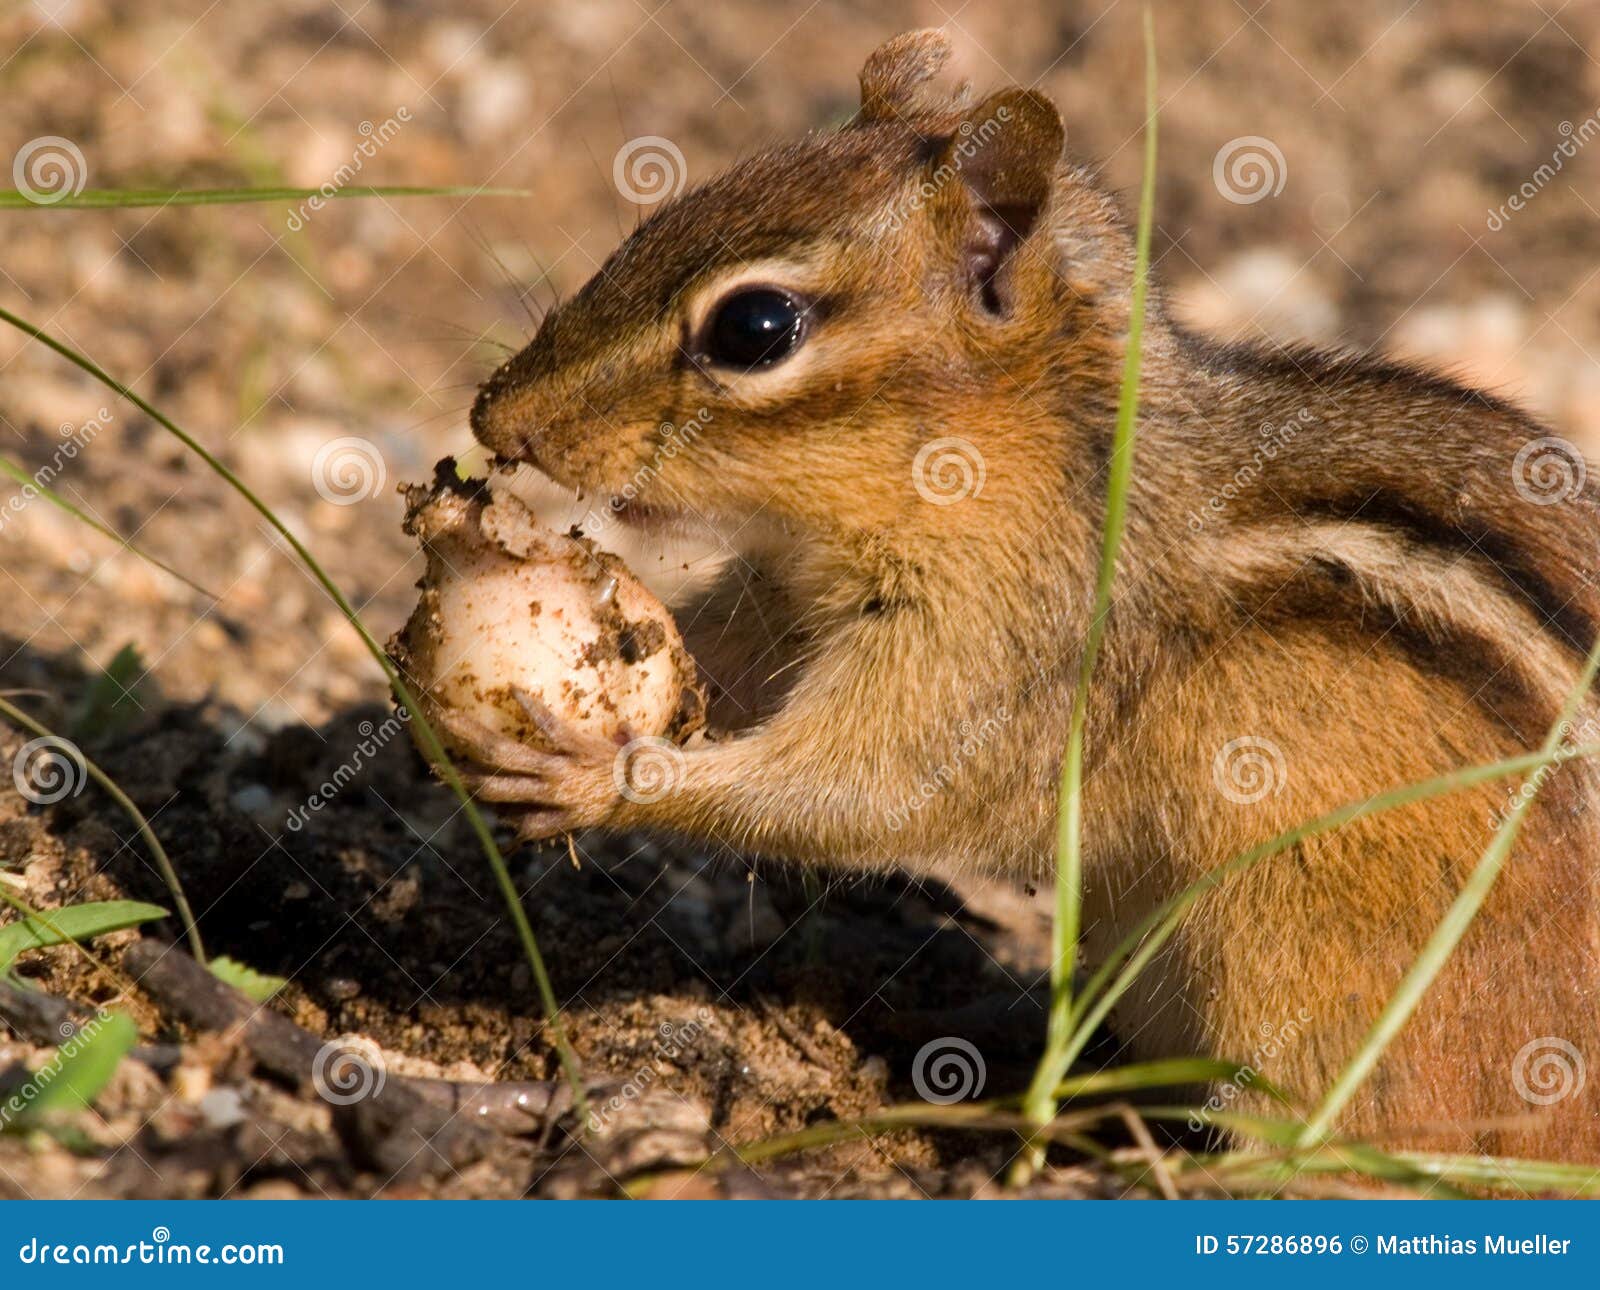 Chipmunk eating bulb stock photo. Image of flower, steal - 57286896